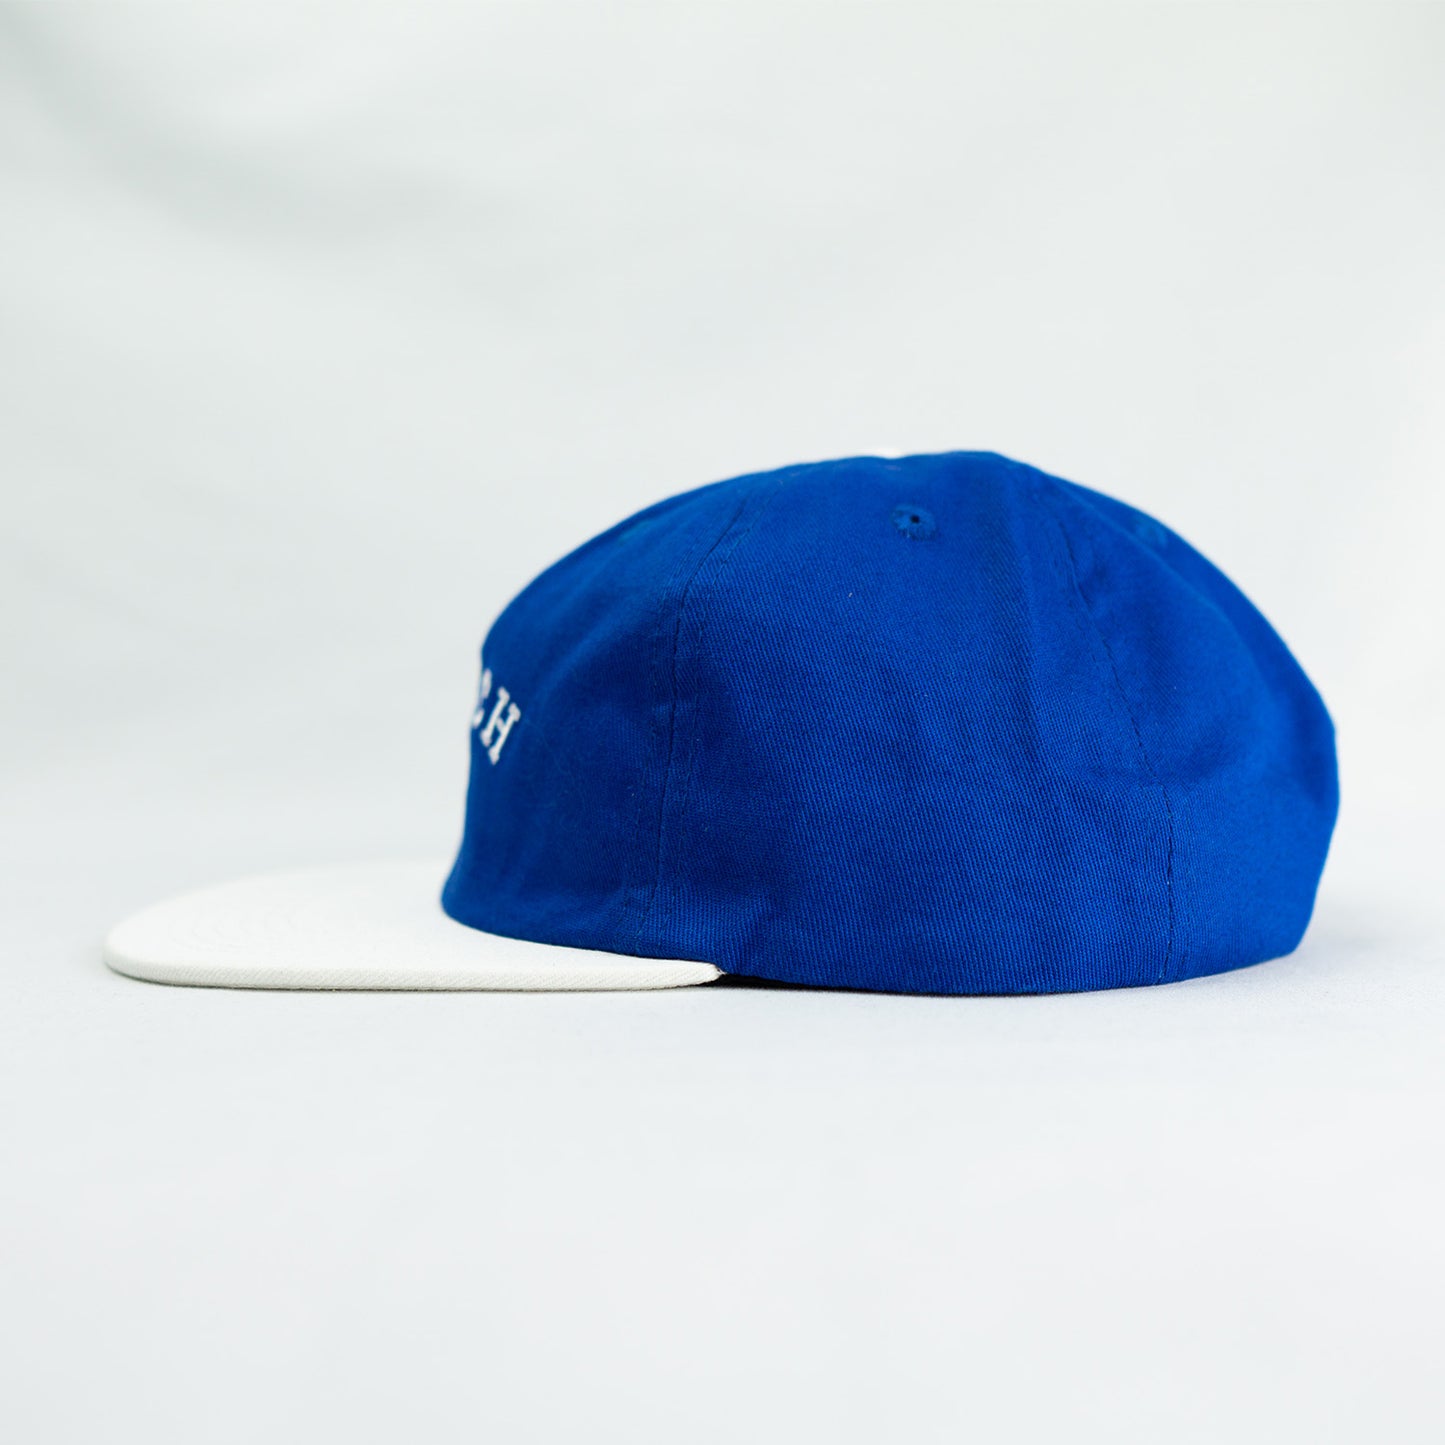 klatch co campbell snapback cap in navy and white left view